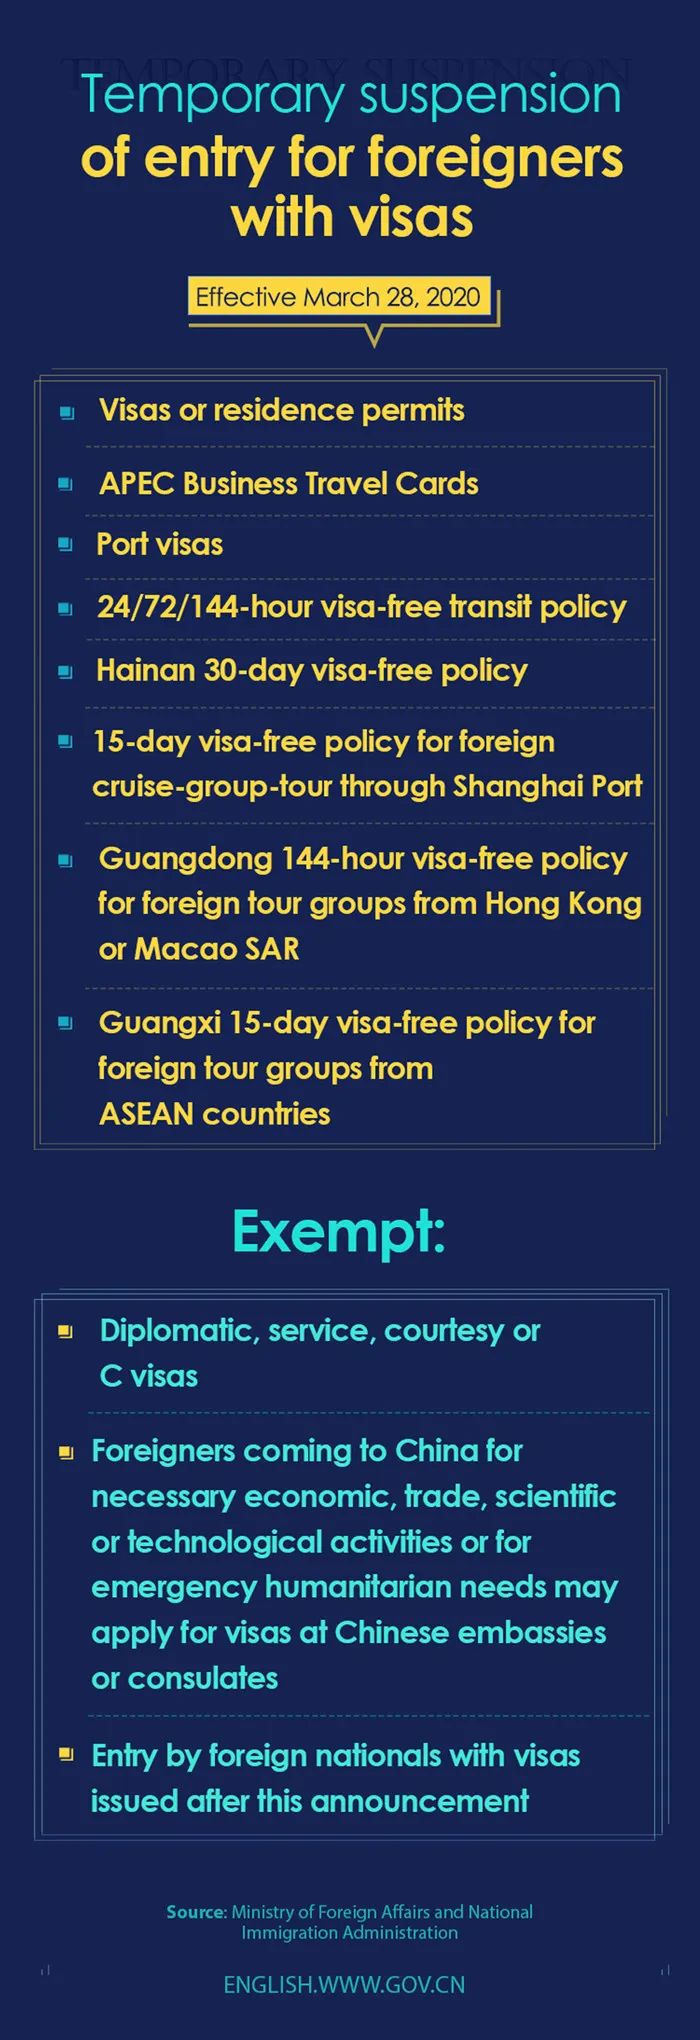 no way to enter china? must leave if visa expires? not really...